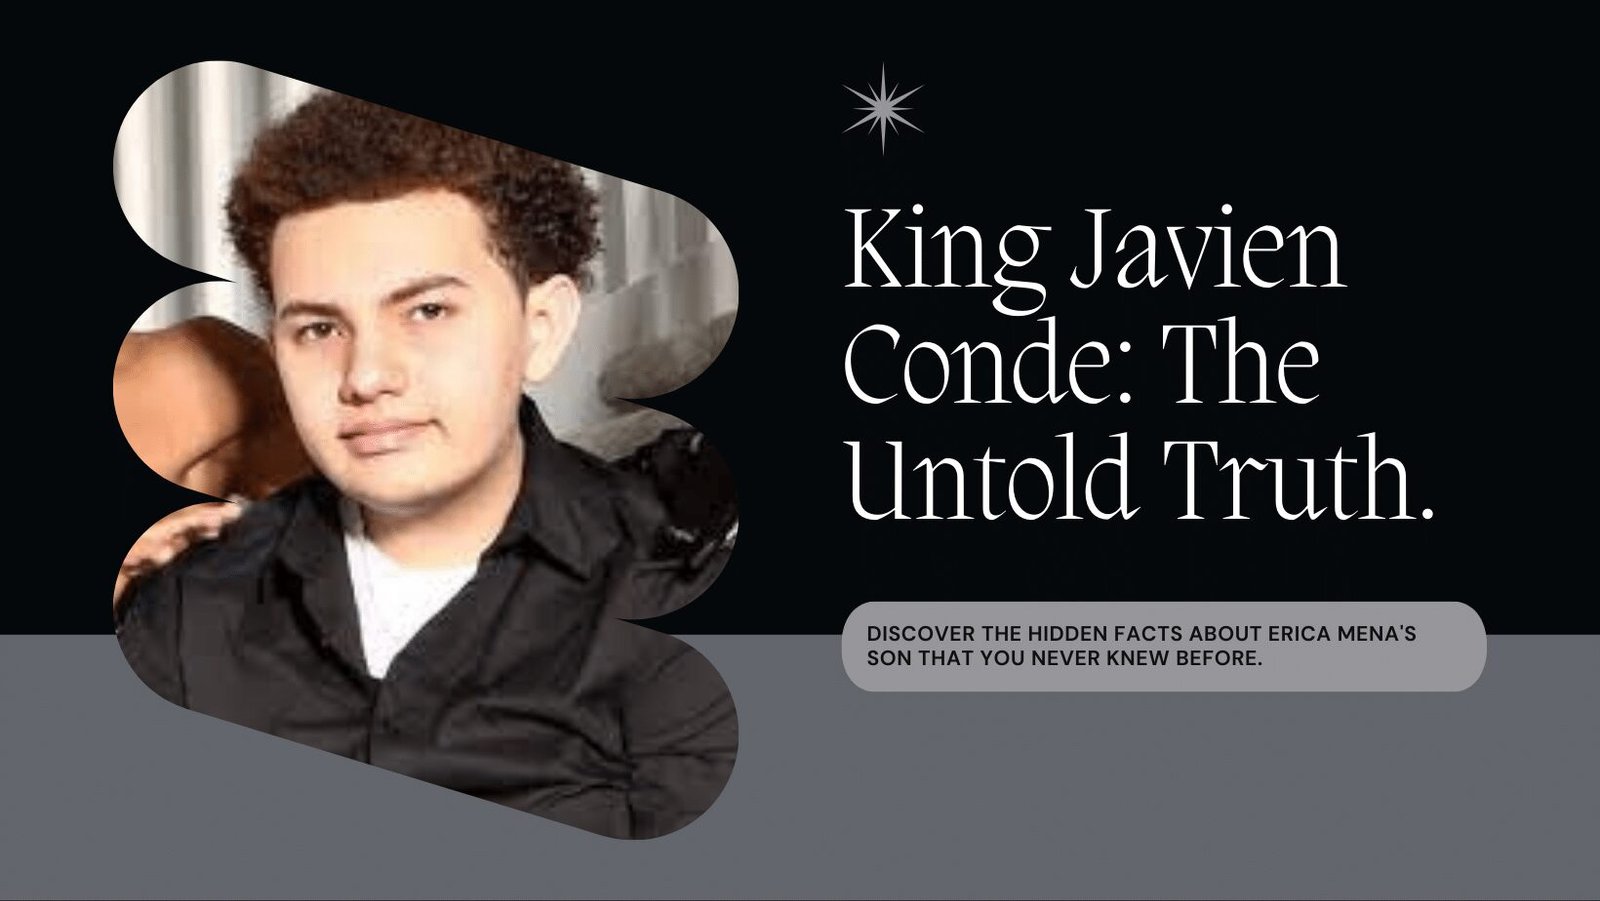 King Javien Conde The Untold Truth About Erica Mena’s Son